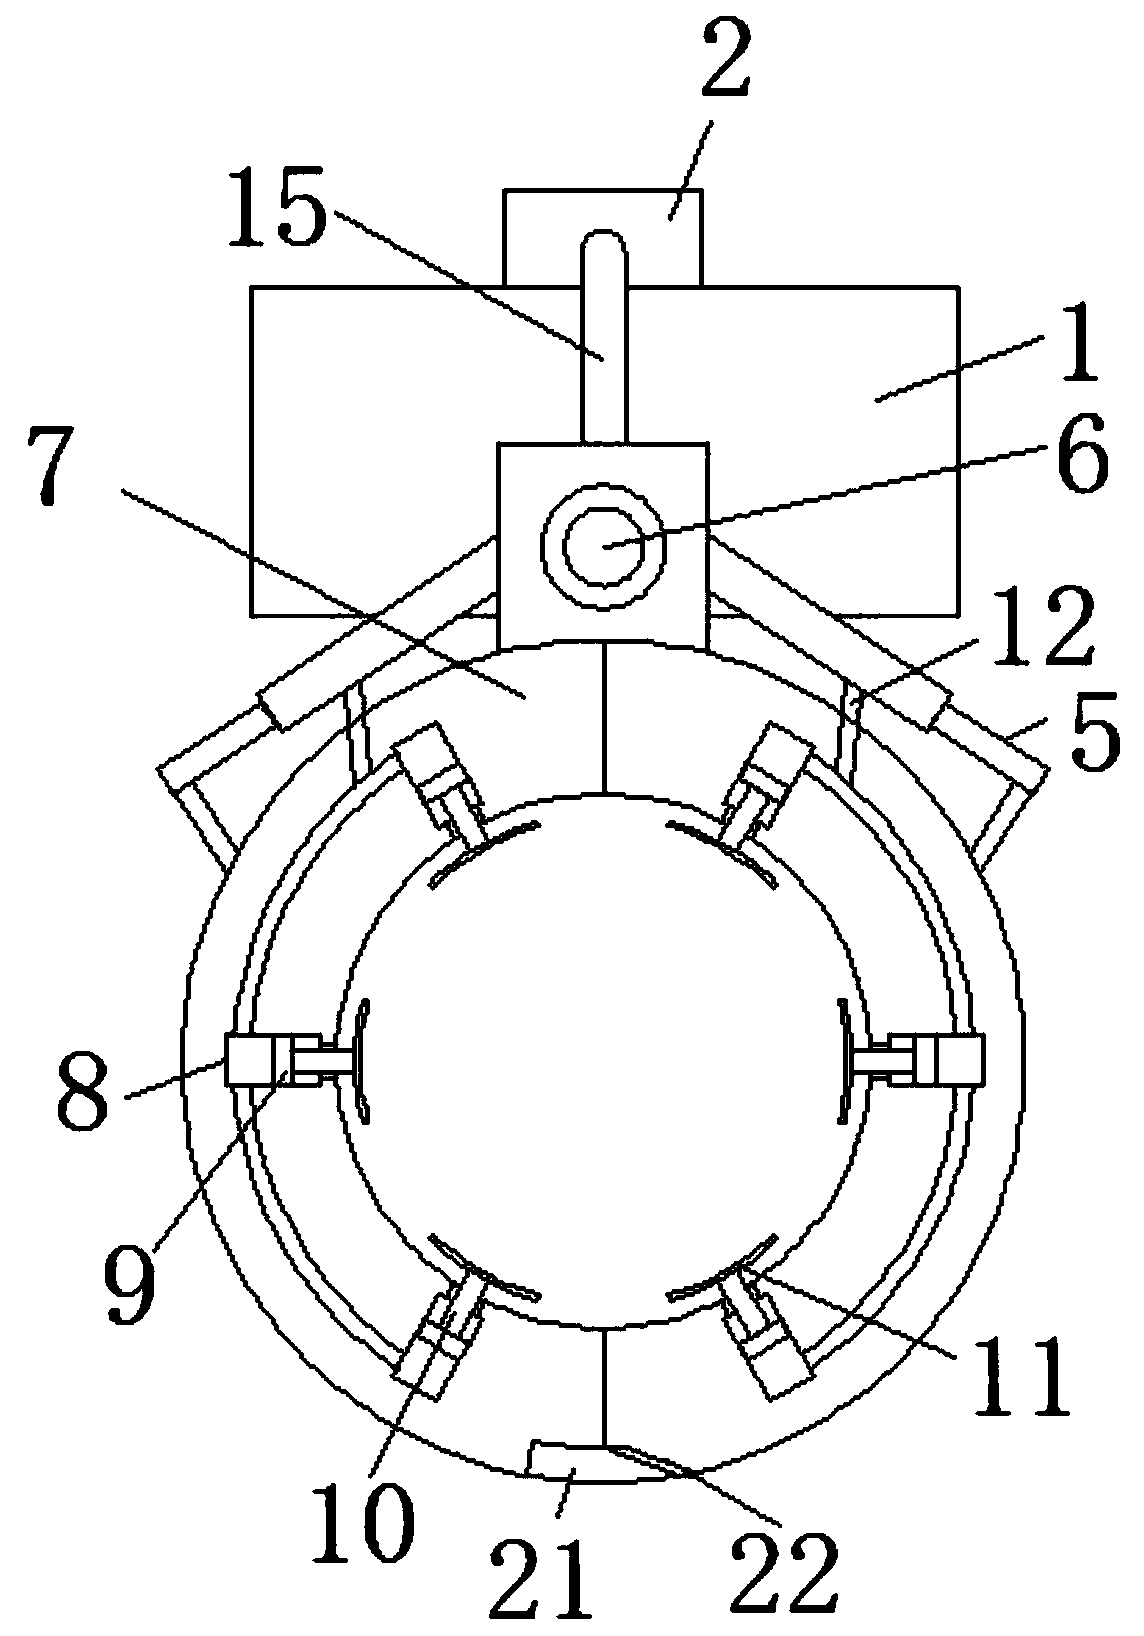 Hydraulic clamping device for hardware numerical control machining